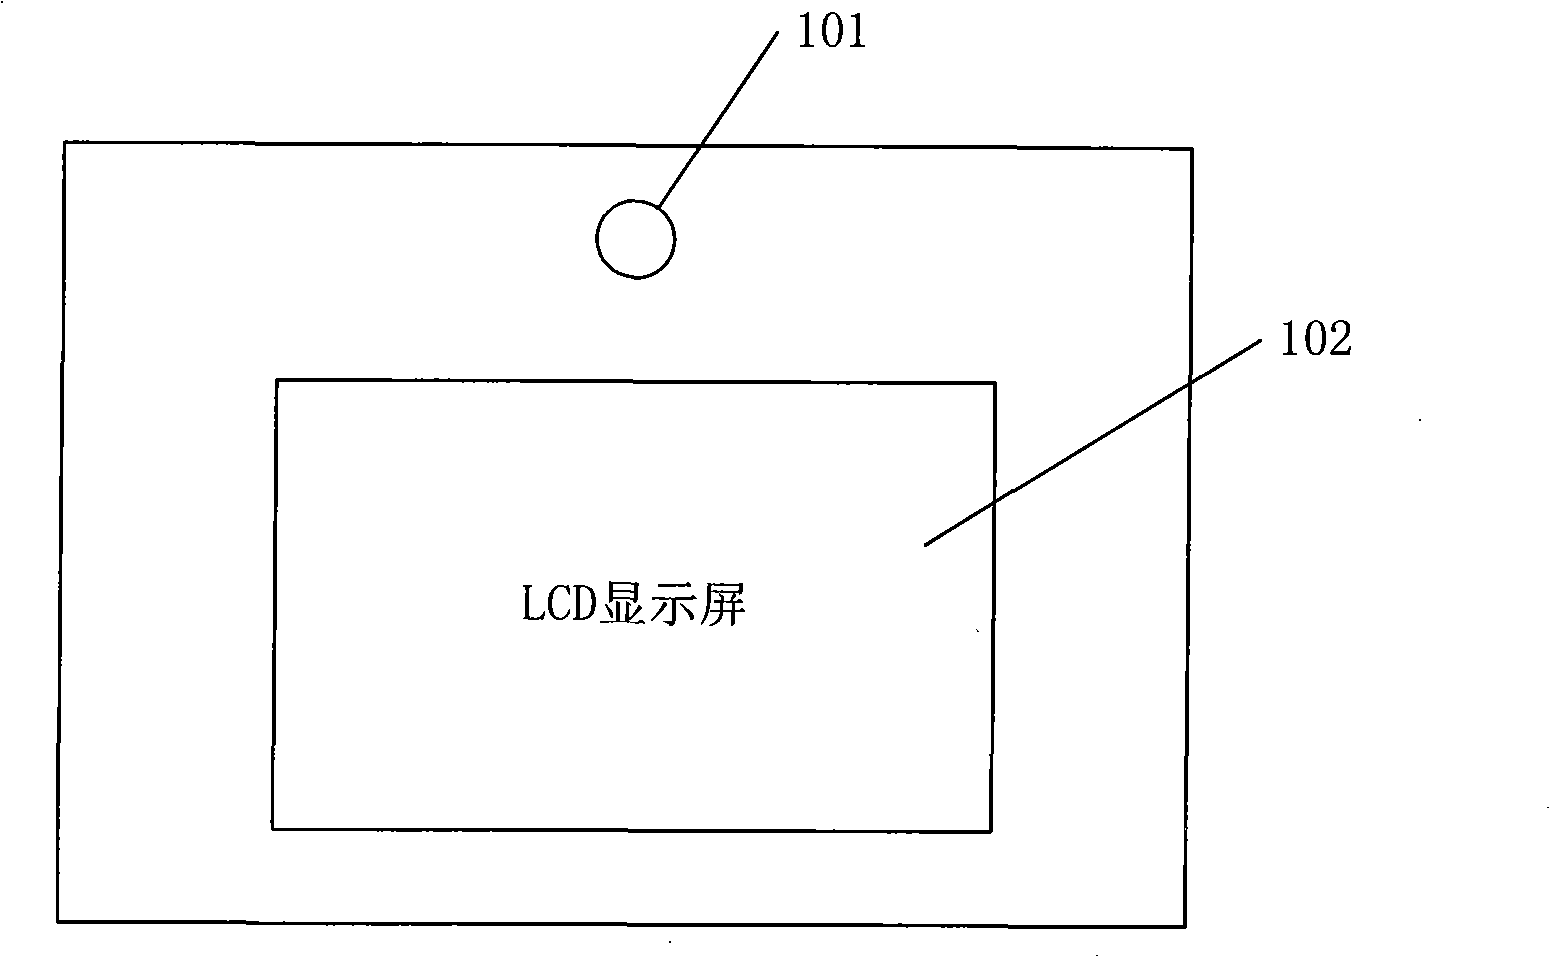 Self-test method for LCD display with camera